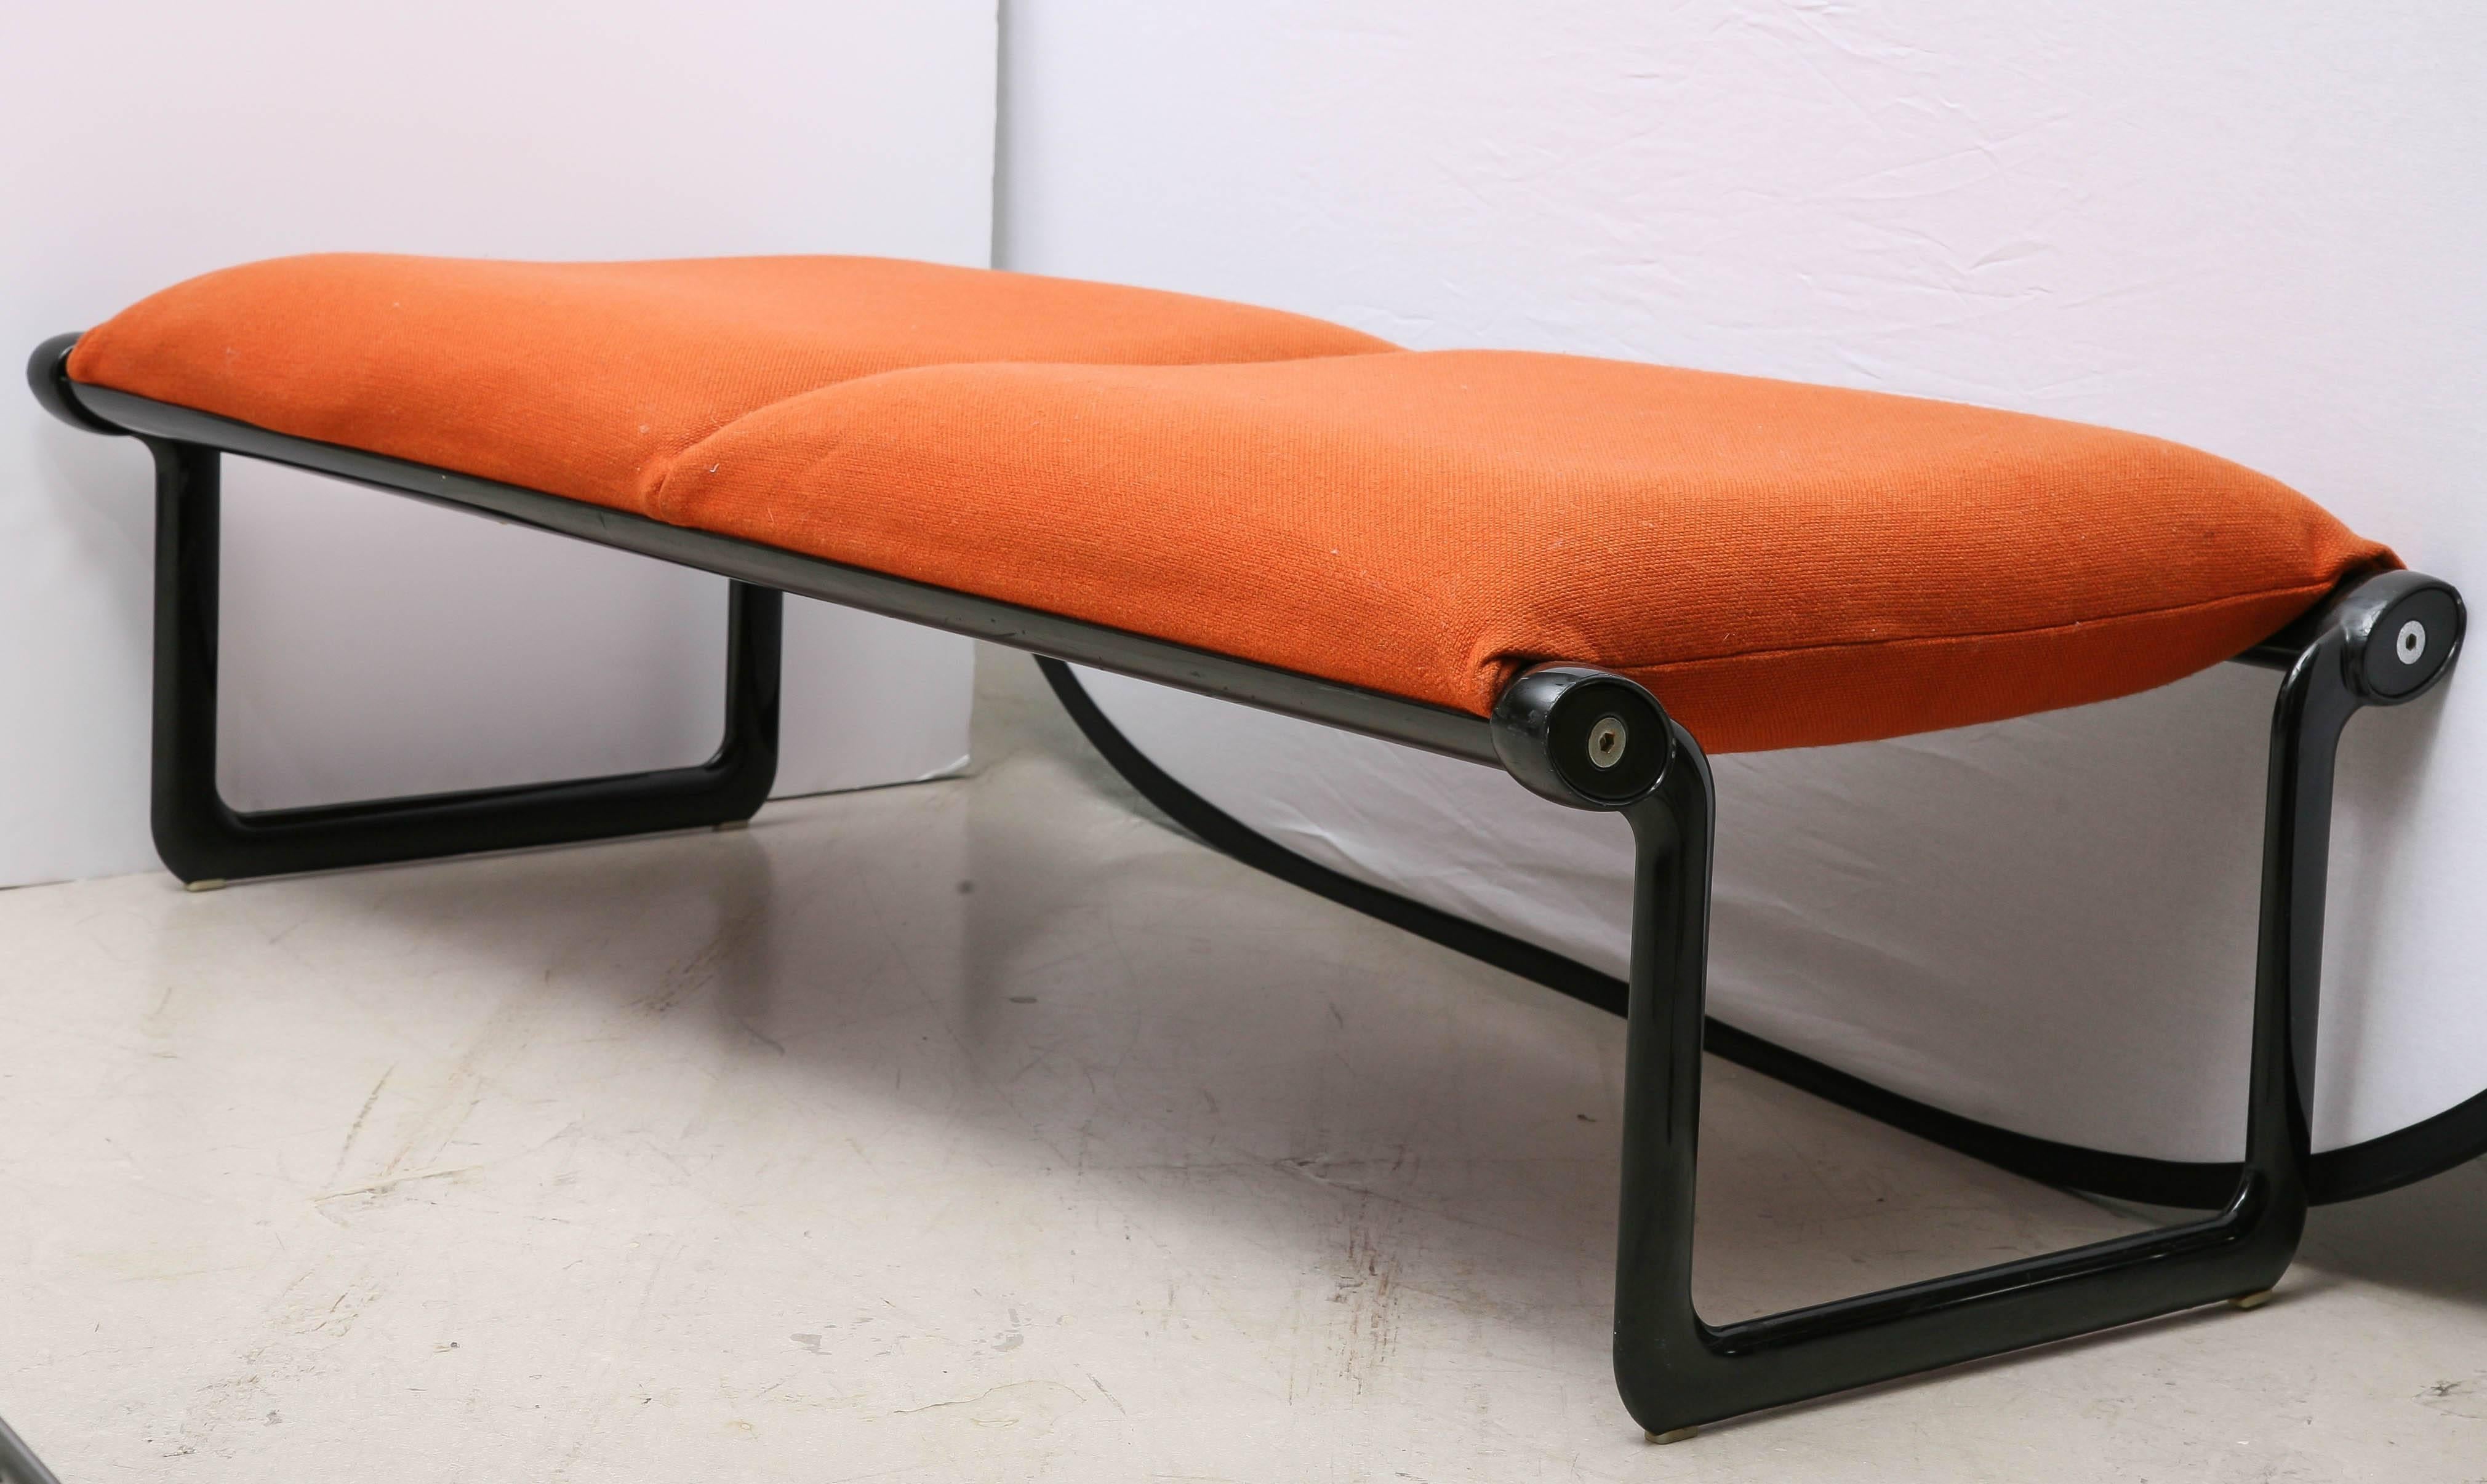 Knoll two-seat bench with orange fabric.